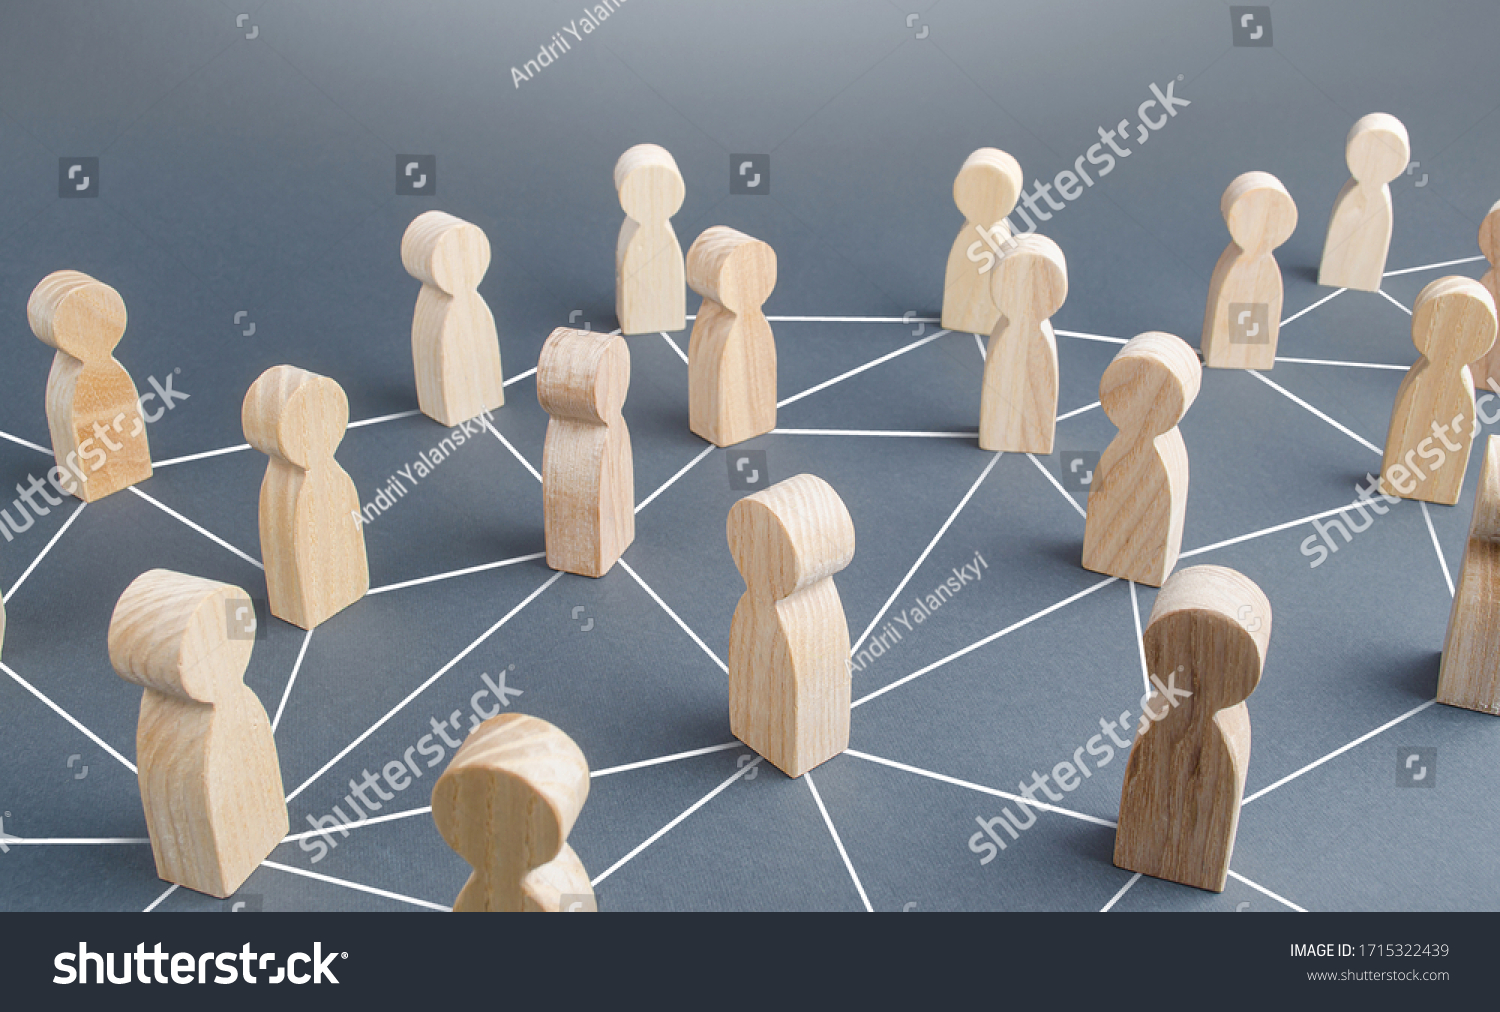 People connected people by lines. Society concept. Social science relationships. Cooperation and collaboration, news gossip spread. Teamwork. Marketing, dissemination of trends and information #1715322439